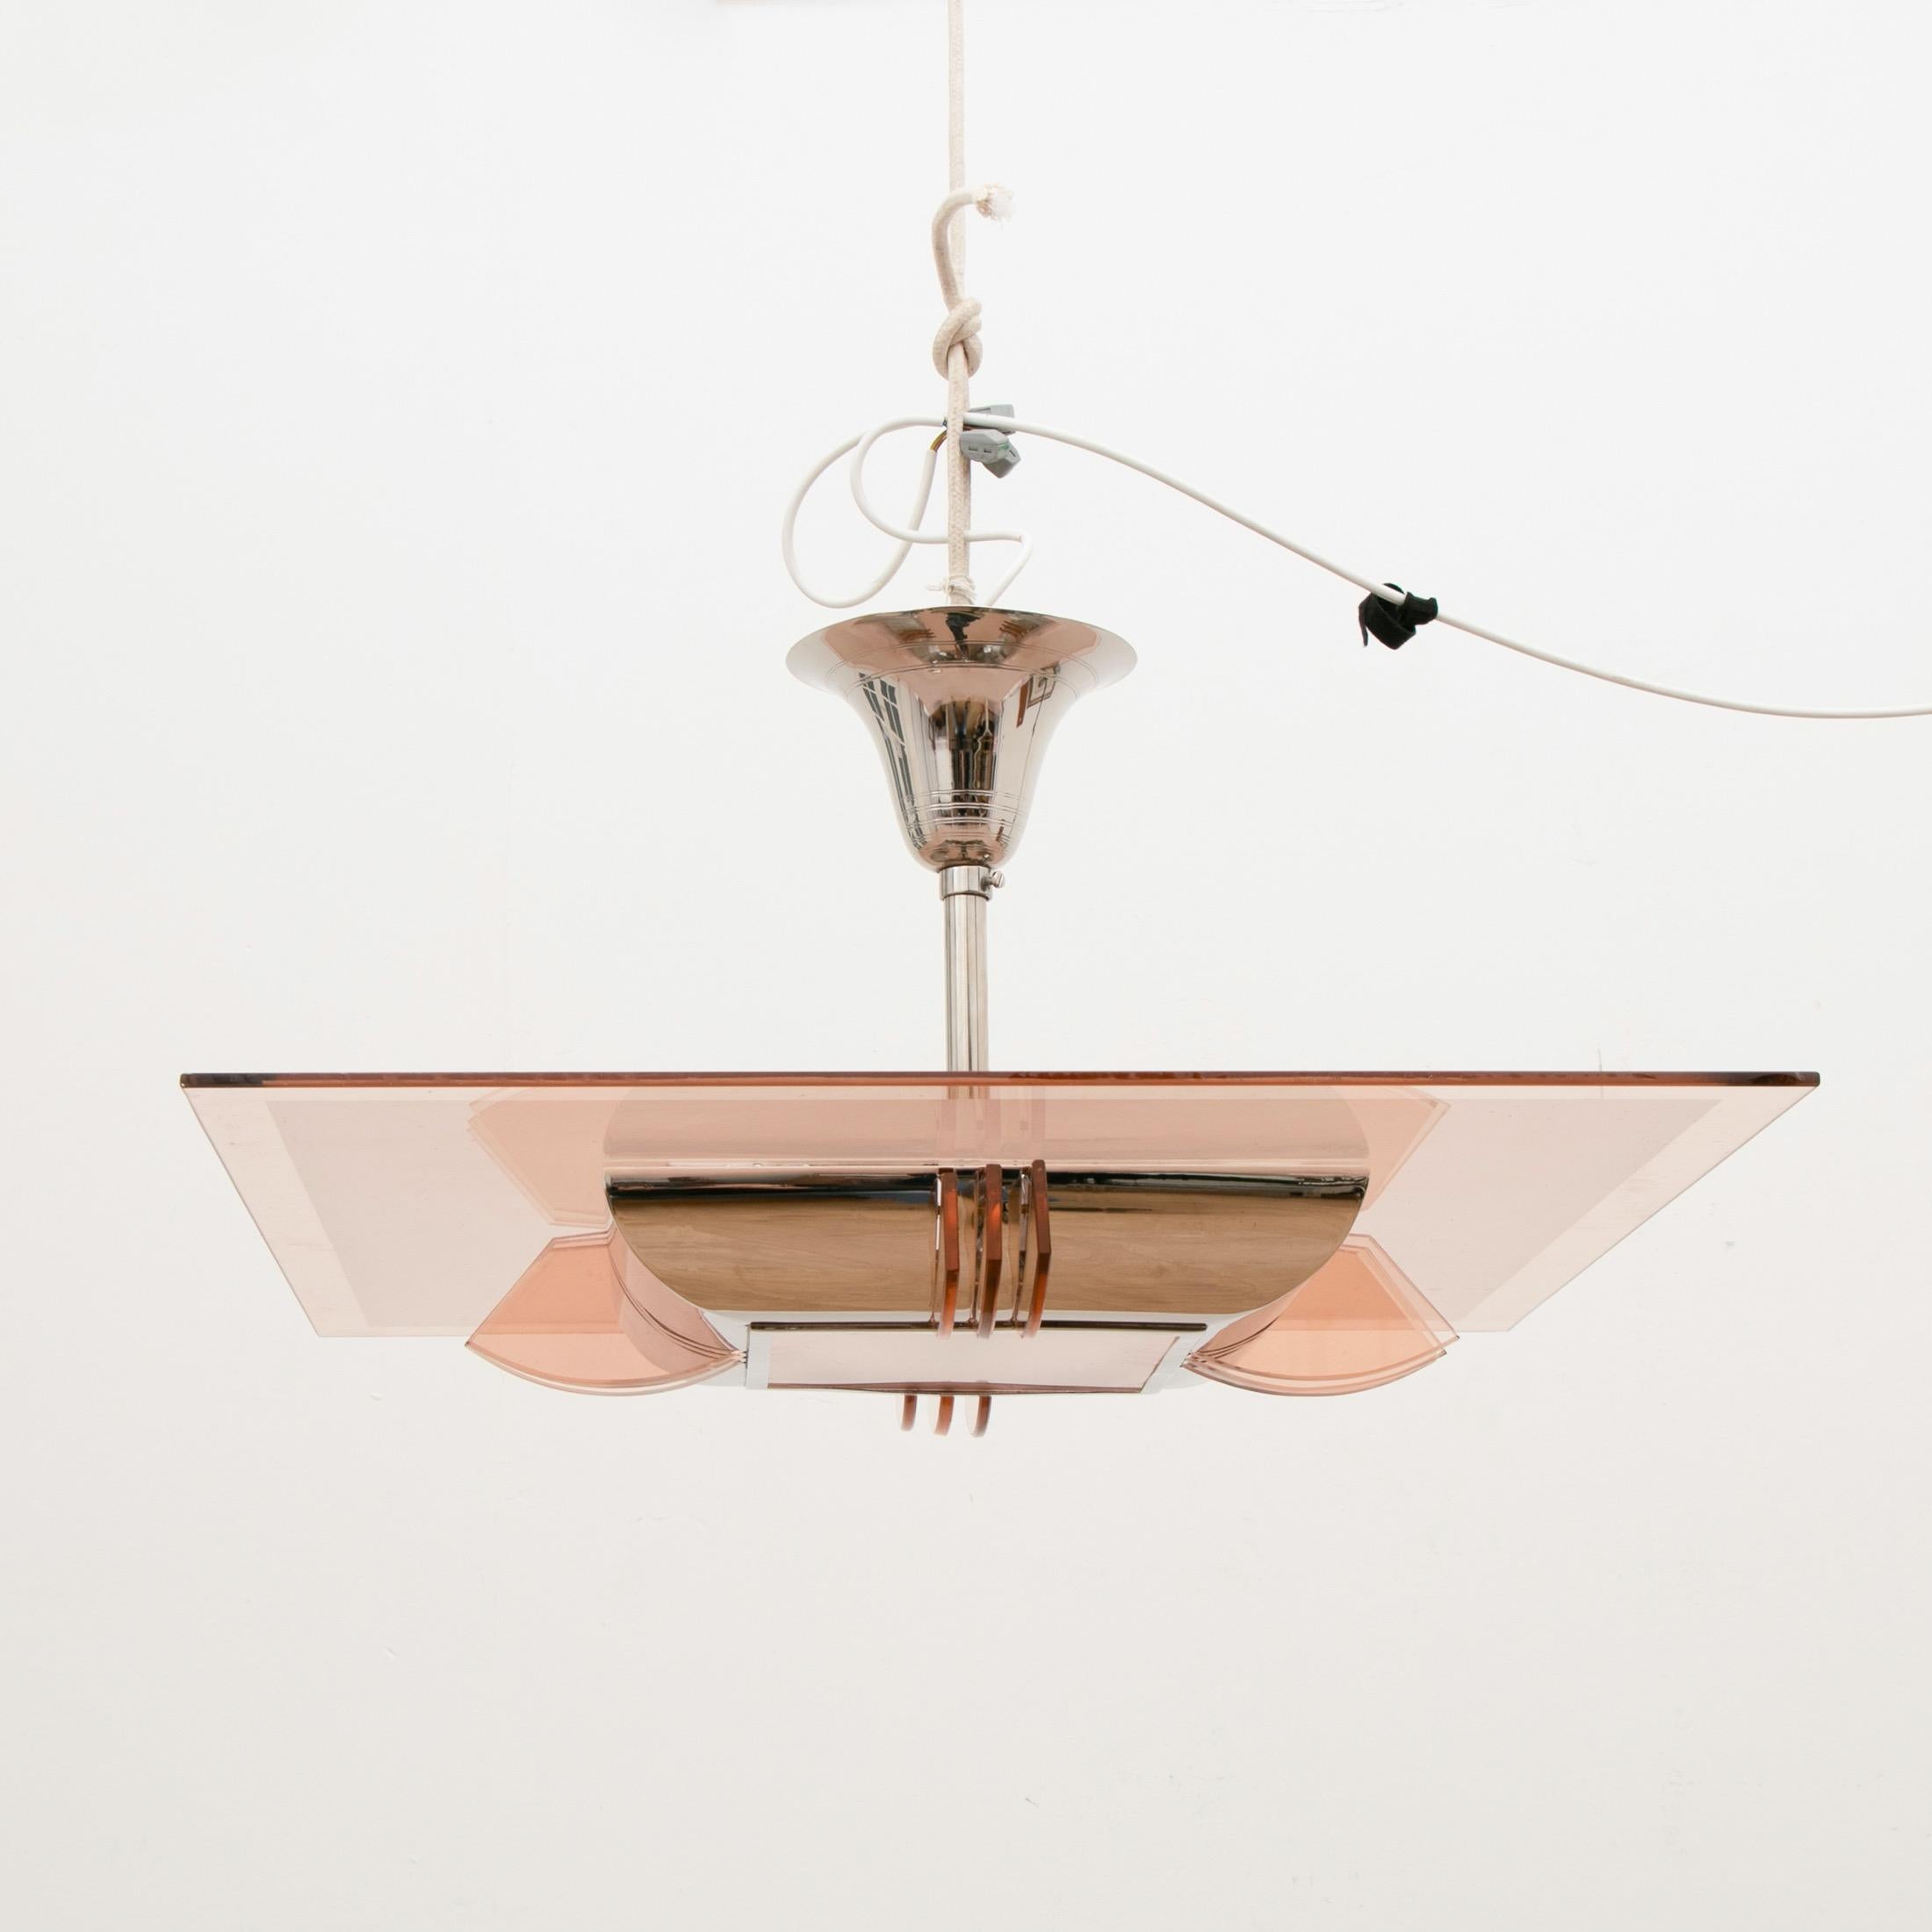 A smart modernist Art Deco chandelier by Atelier Petitot.
Square frosted peach glass with three-light transformer glass slides at the centre of each horizontal.
The square peach glass rests on a curved chrome frame, suspended on a single rod with